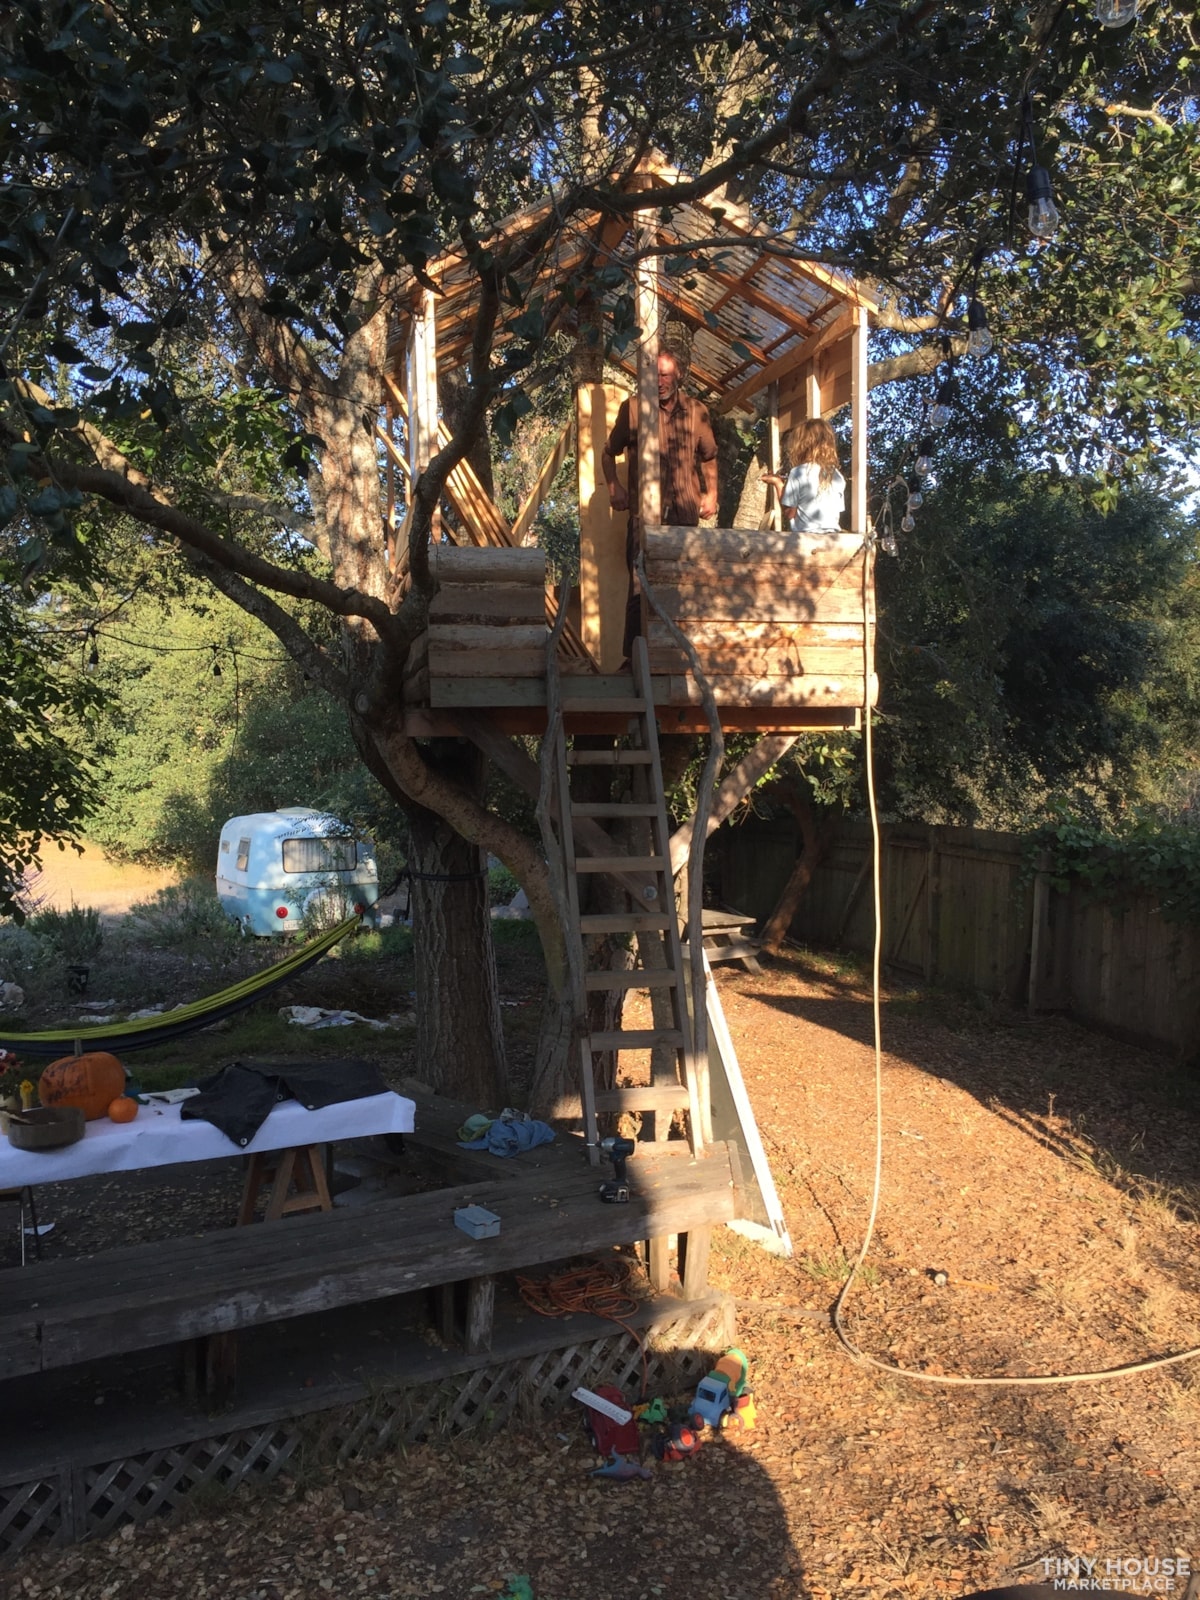 Wonderful place to park your tiny home in West Marin - Slide 1